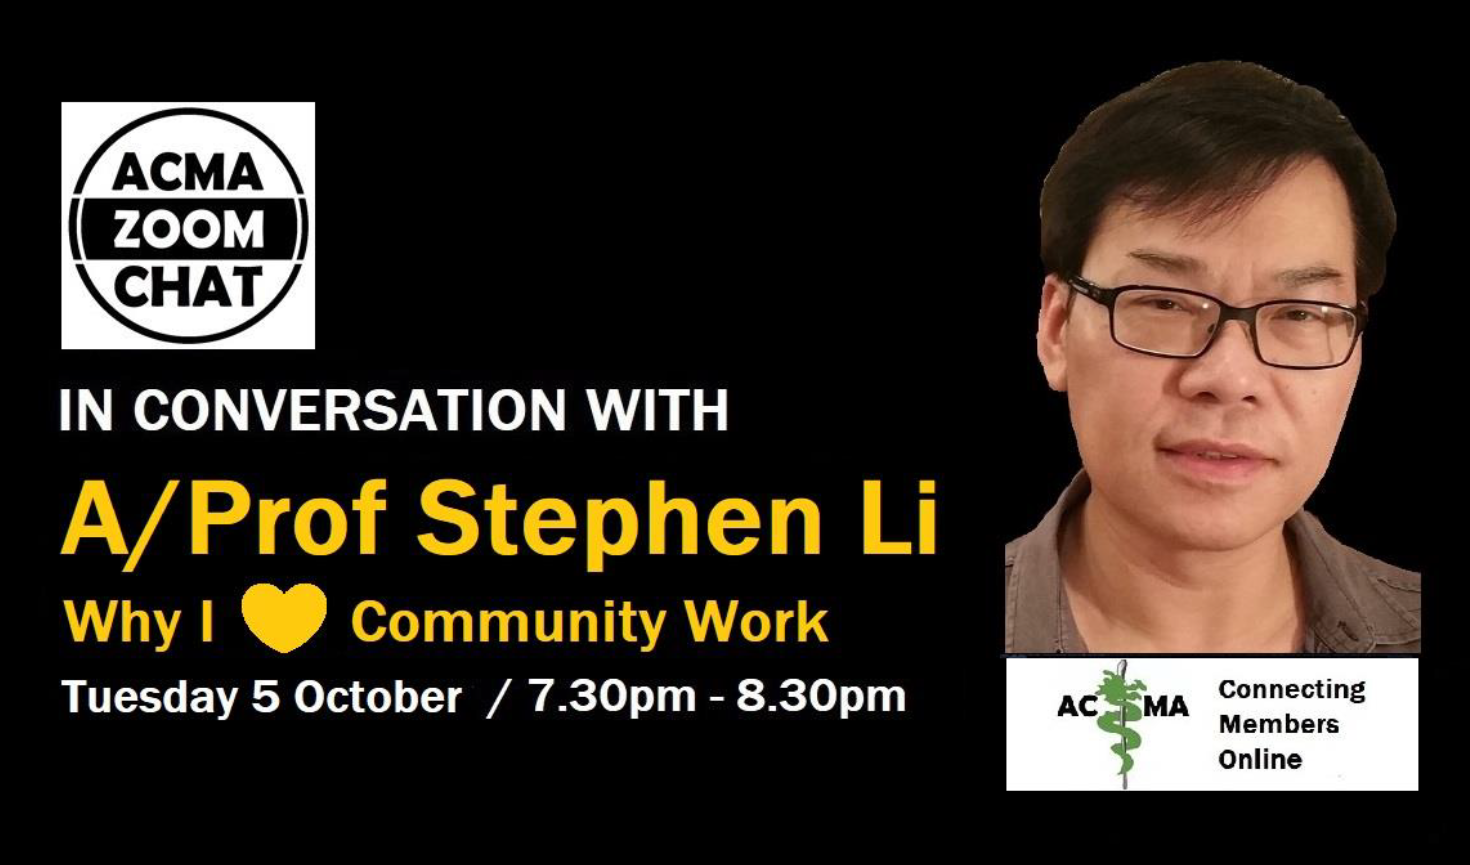 ACMA Chat Event Banner, featuring A/Prof Stephen LiACMA Chat Event Banner, featuring A/Prof Stephen Li